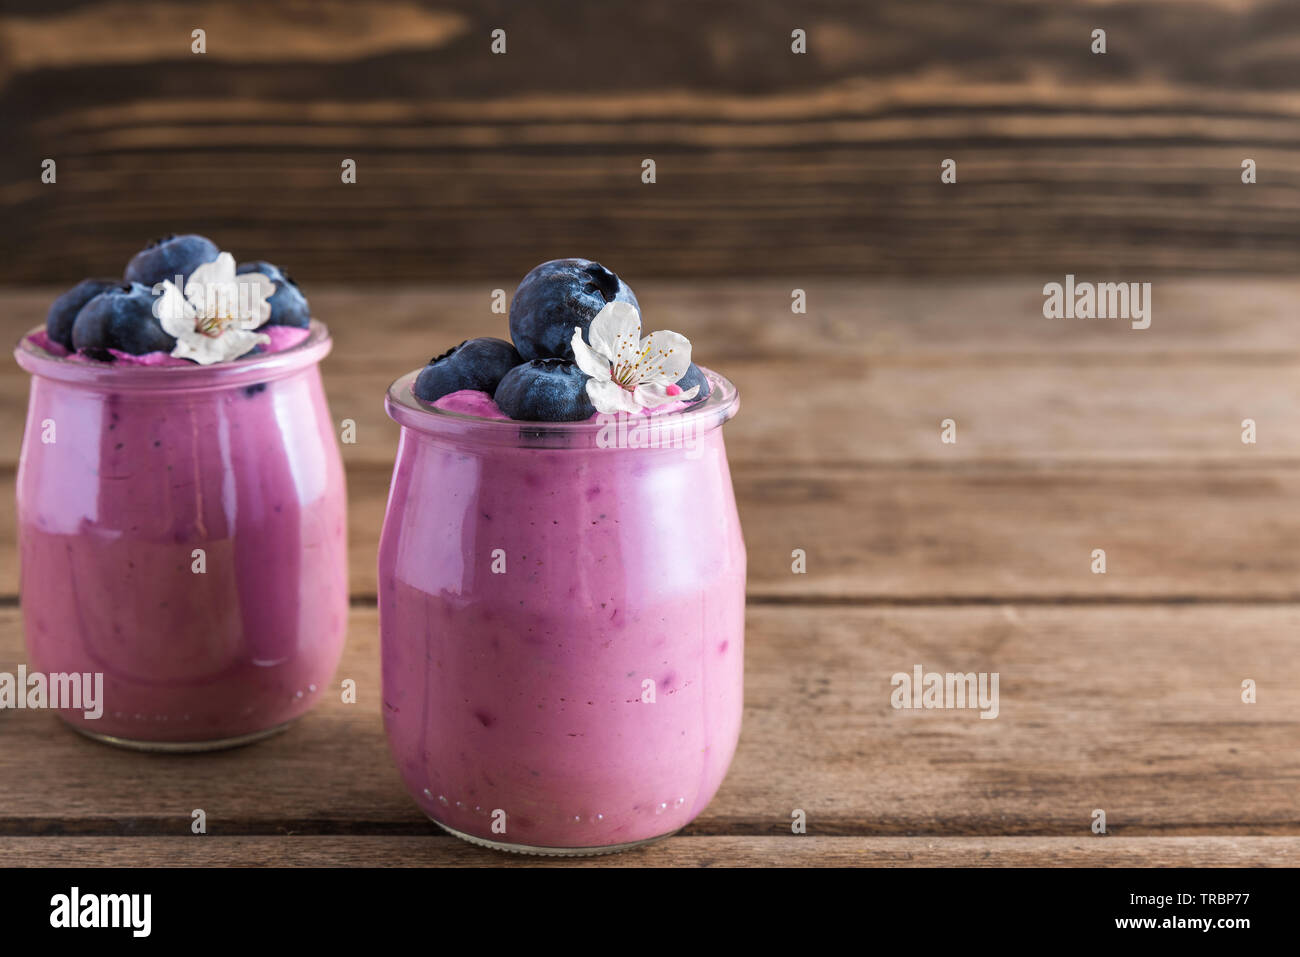 Two glasses of blueberry yogurt with fresh blueberries and spring flowers for healthy breakfast on rustic wooden background. close up Stock Photo